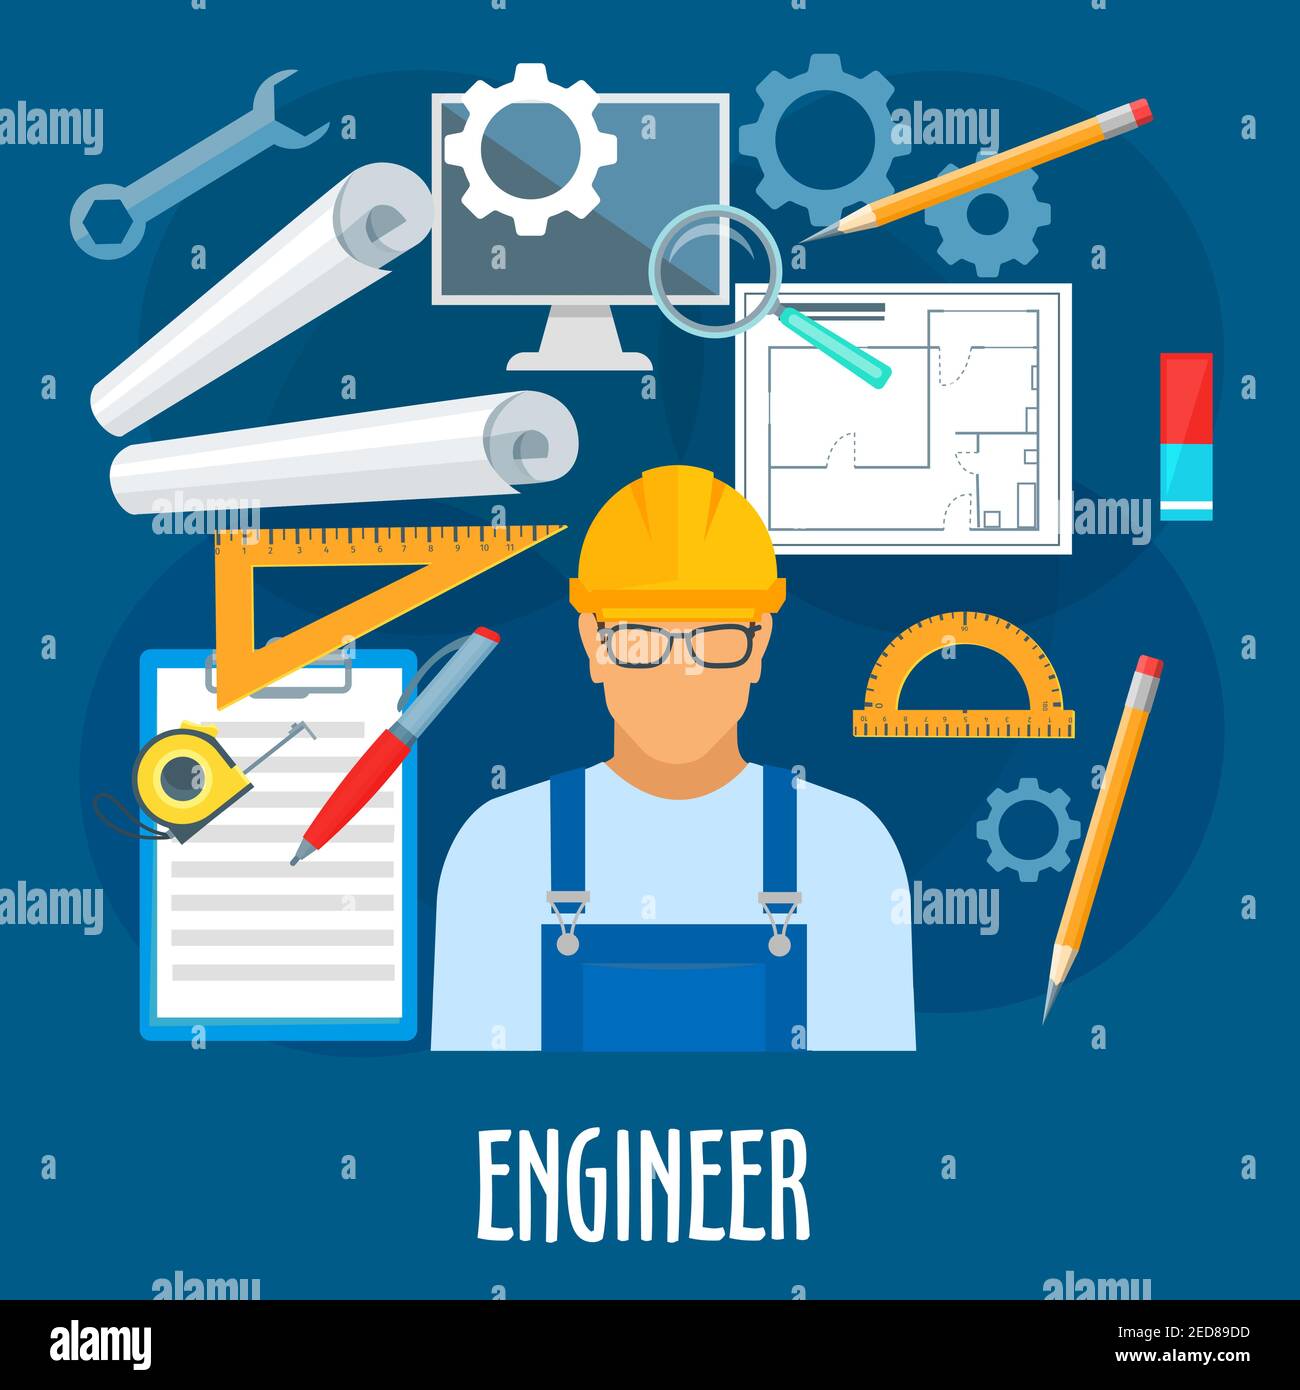 Engineer profession poster. Vector builder worker man in uniform with glasses and safety helmet with building engineering and constriction work tools Stock Vector